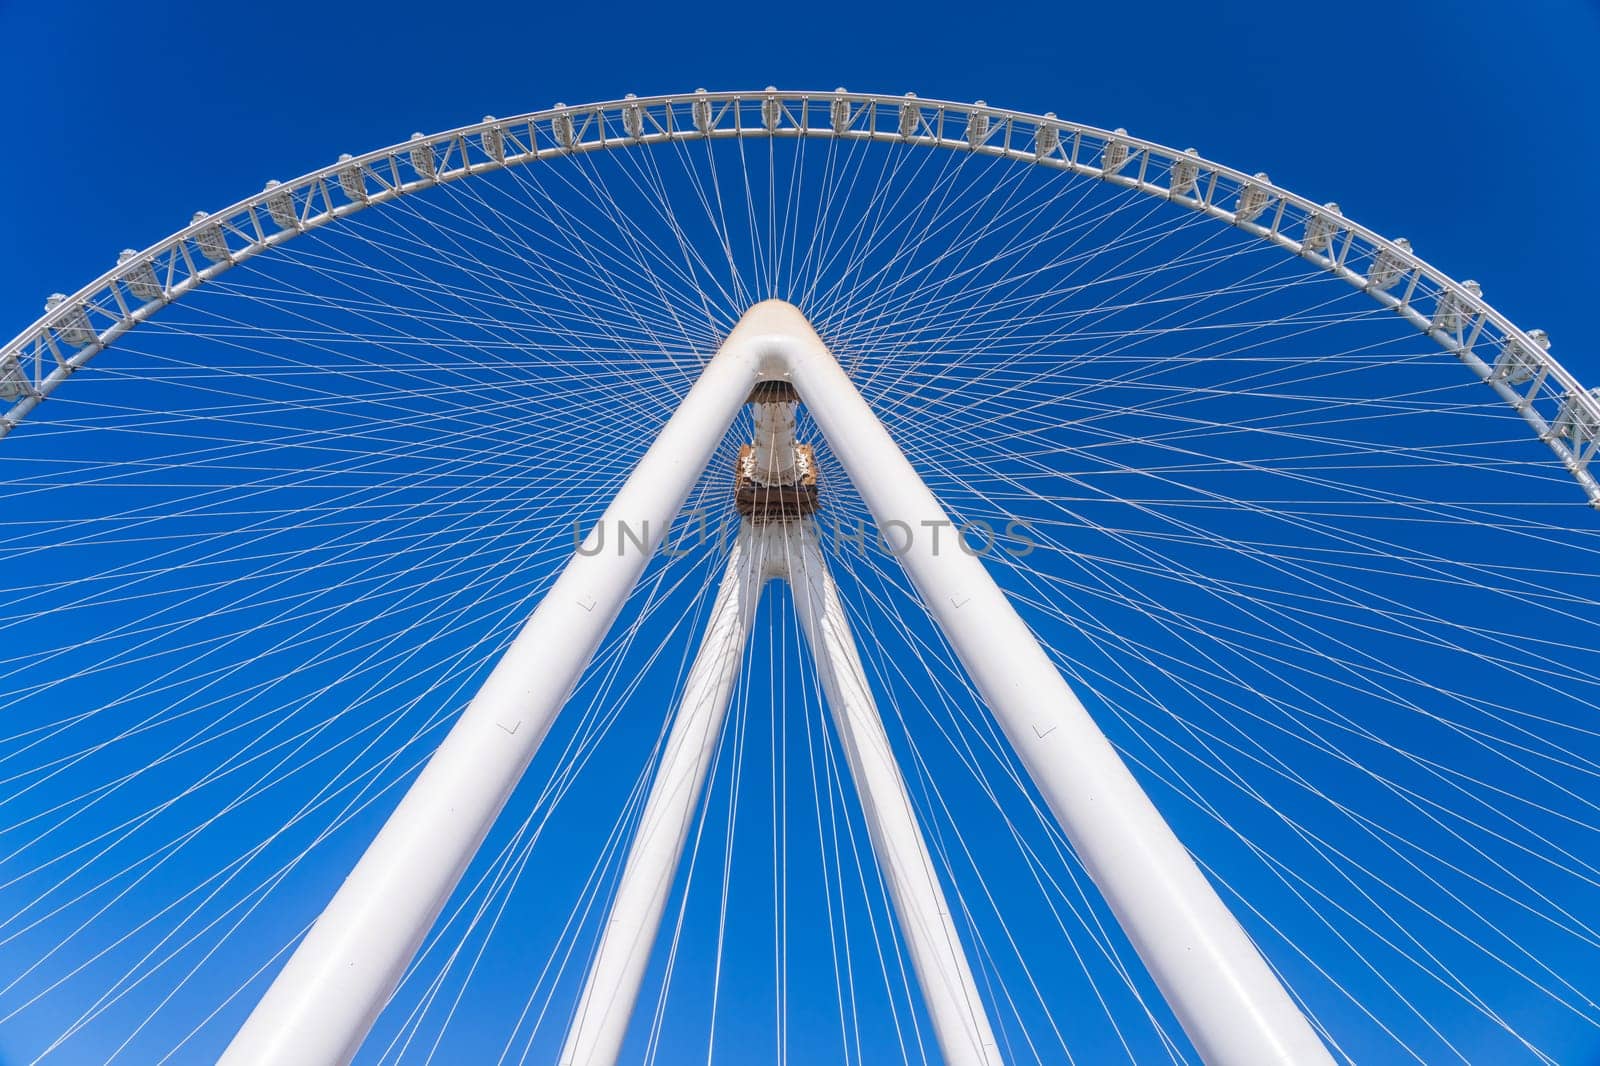 Looking up at Ain Dubai or Dubai Eye Observation Wheel on BlueWaters Island in Jumeirah area